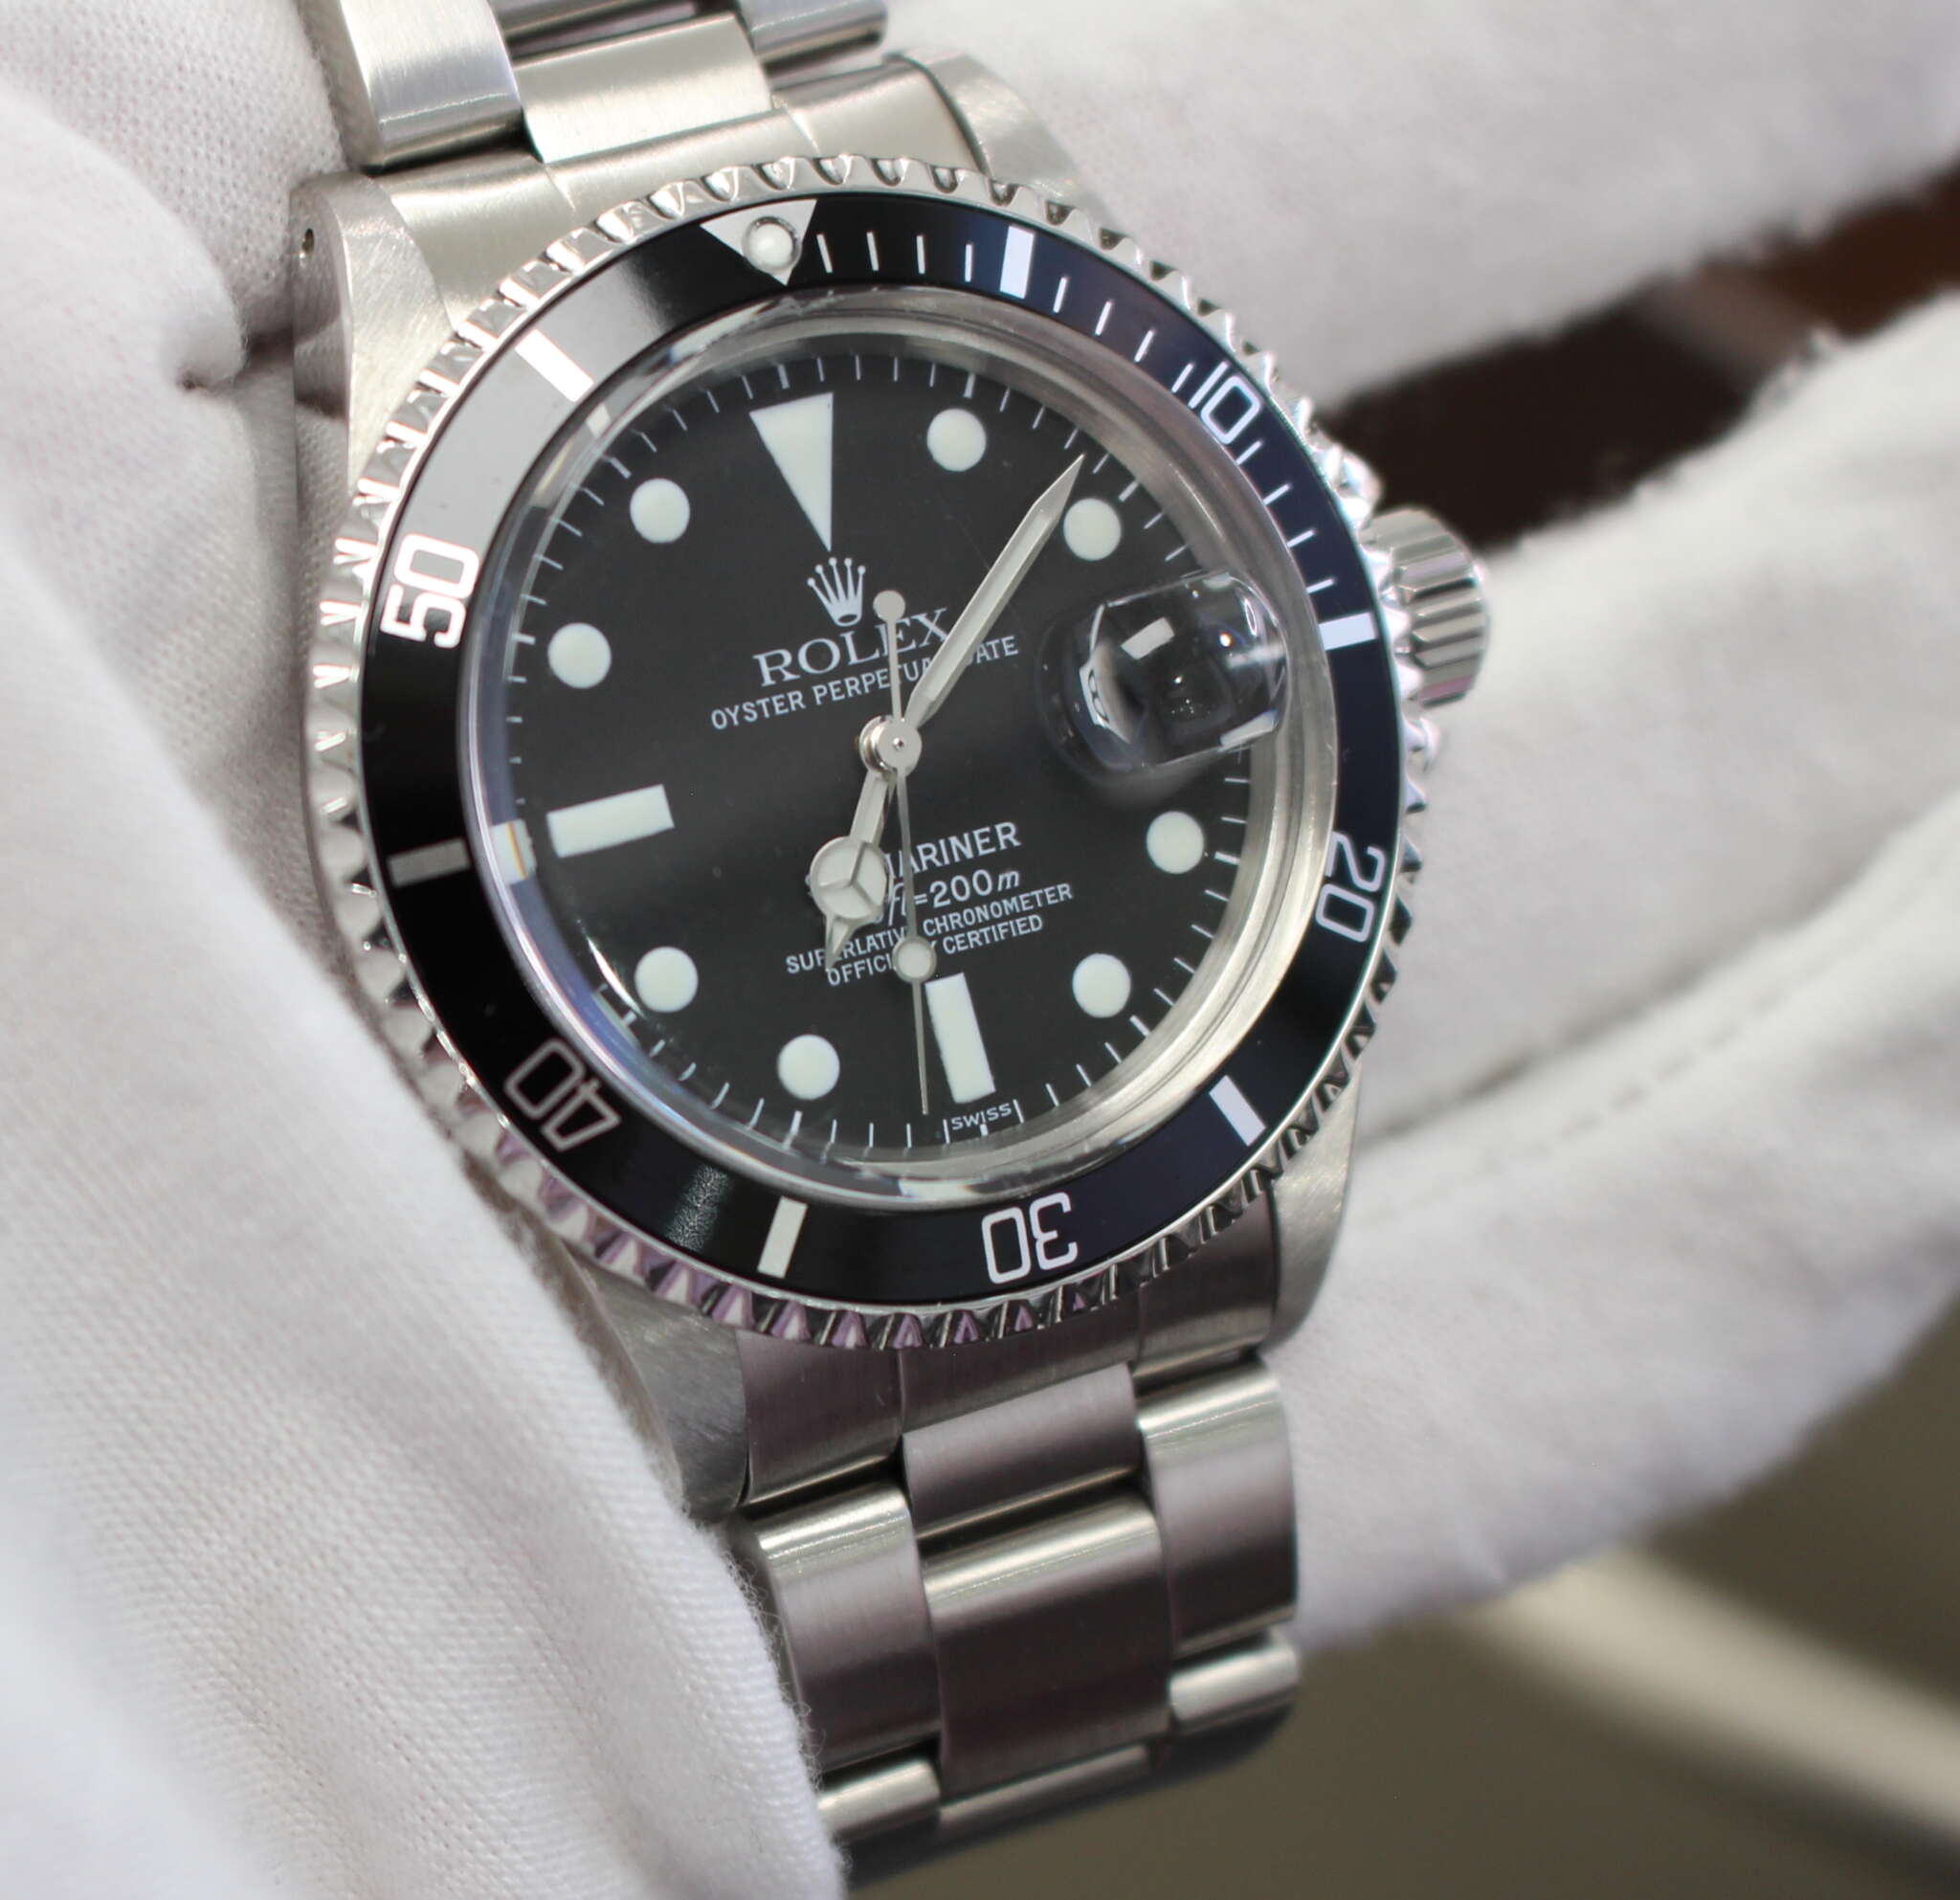 ROLEX SUBMARINER 1680 - Official Time Watch